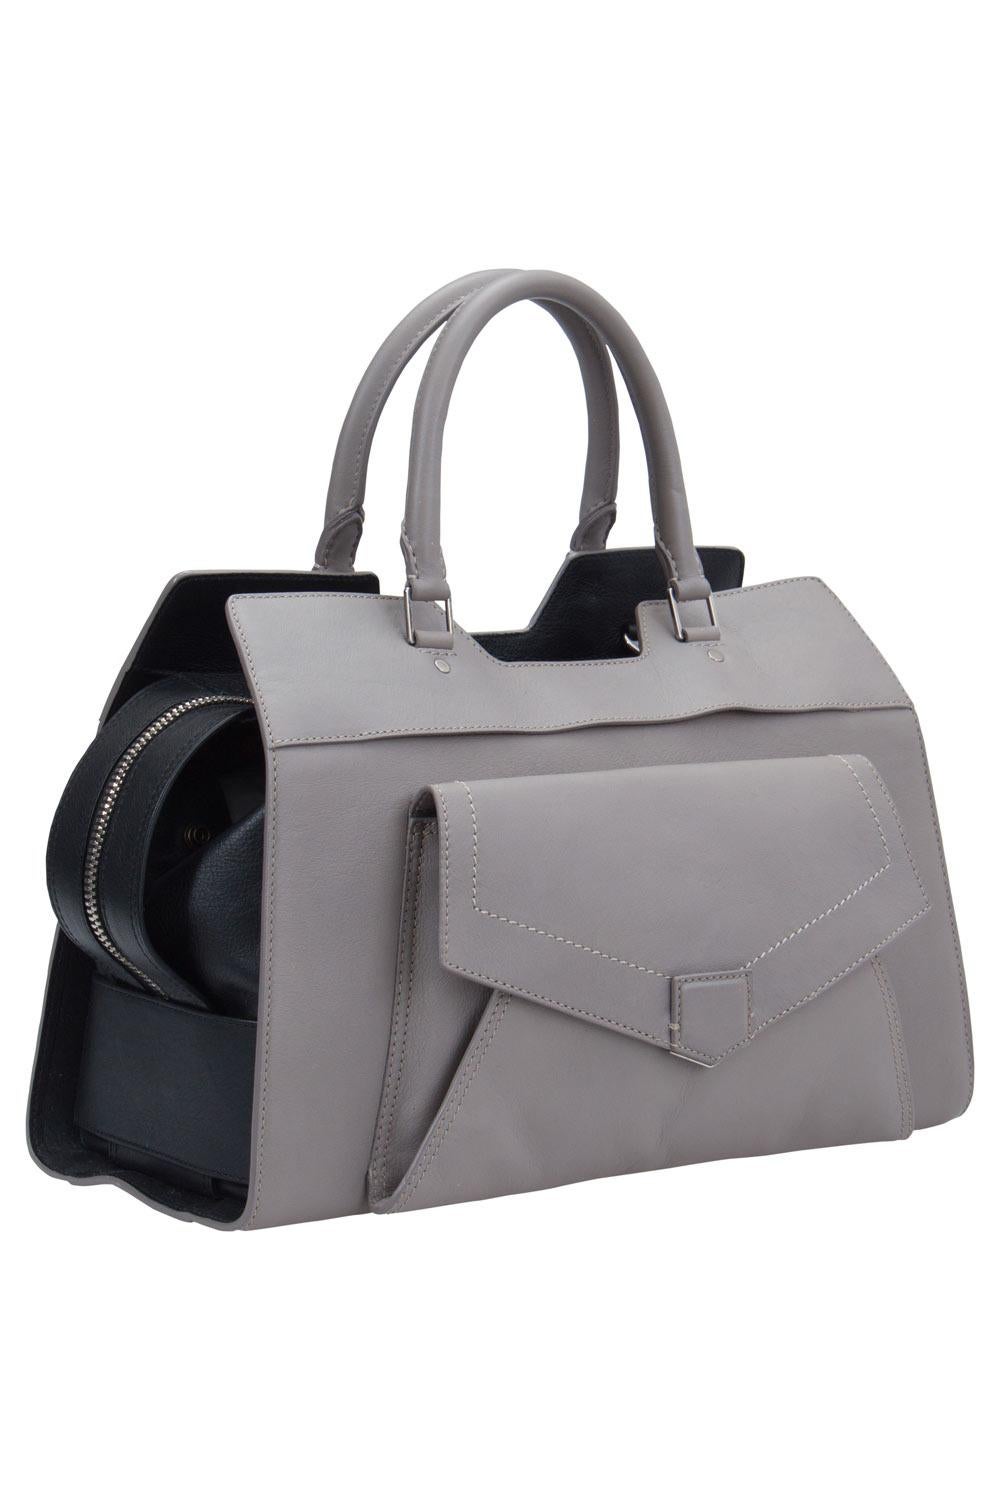 This PS13 satchel by Proenza Schouler has a sophisticated look. Crafted from leather, it is held by two top handles and a detachable shoulder strap. The top zipper opens to a spacious fabric interior and the bag is complete with a front flap pocket.